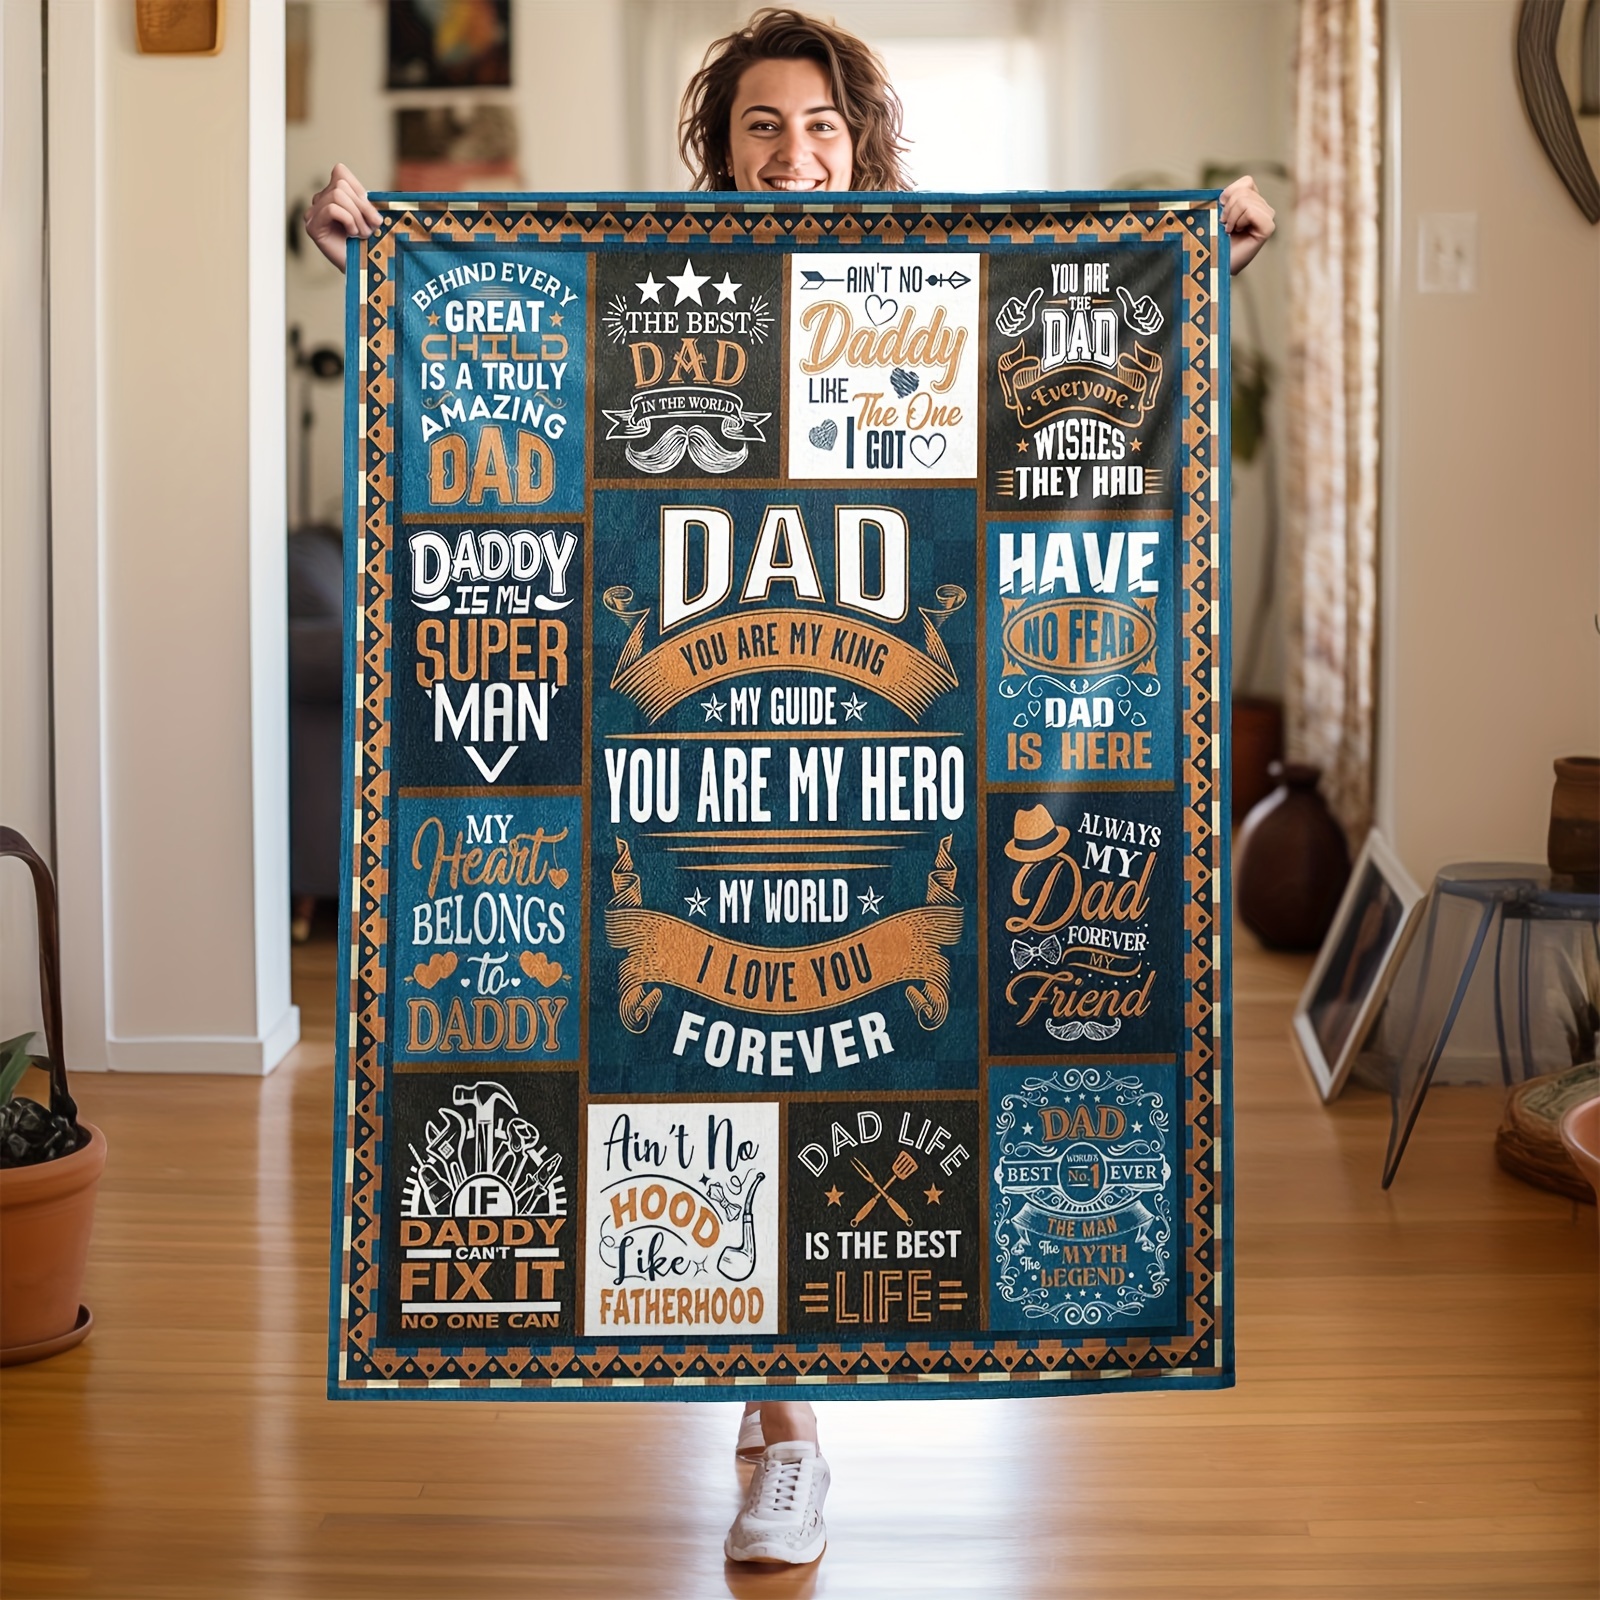 

1 Pc Dad Gifts From Daughter, Dad Birthday Gift, Gifts For Dad Blanket, Dad Gifts From Son, , Christmas Dad Gifts, Fathers Day Dad Gifts Ideas, Dads Gifts, To My Dad Blanket